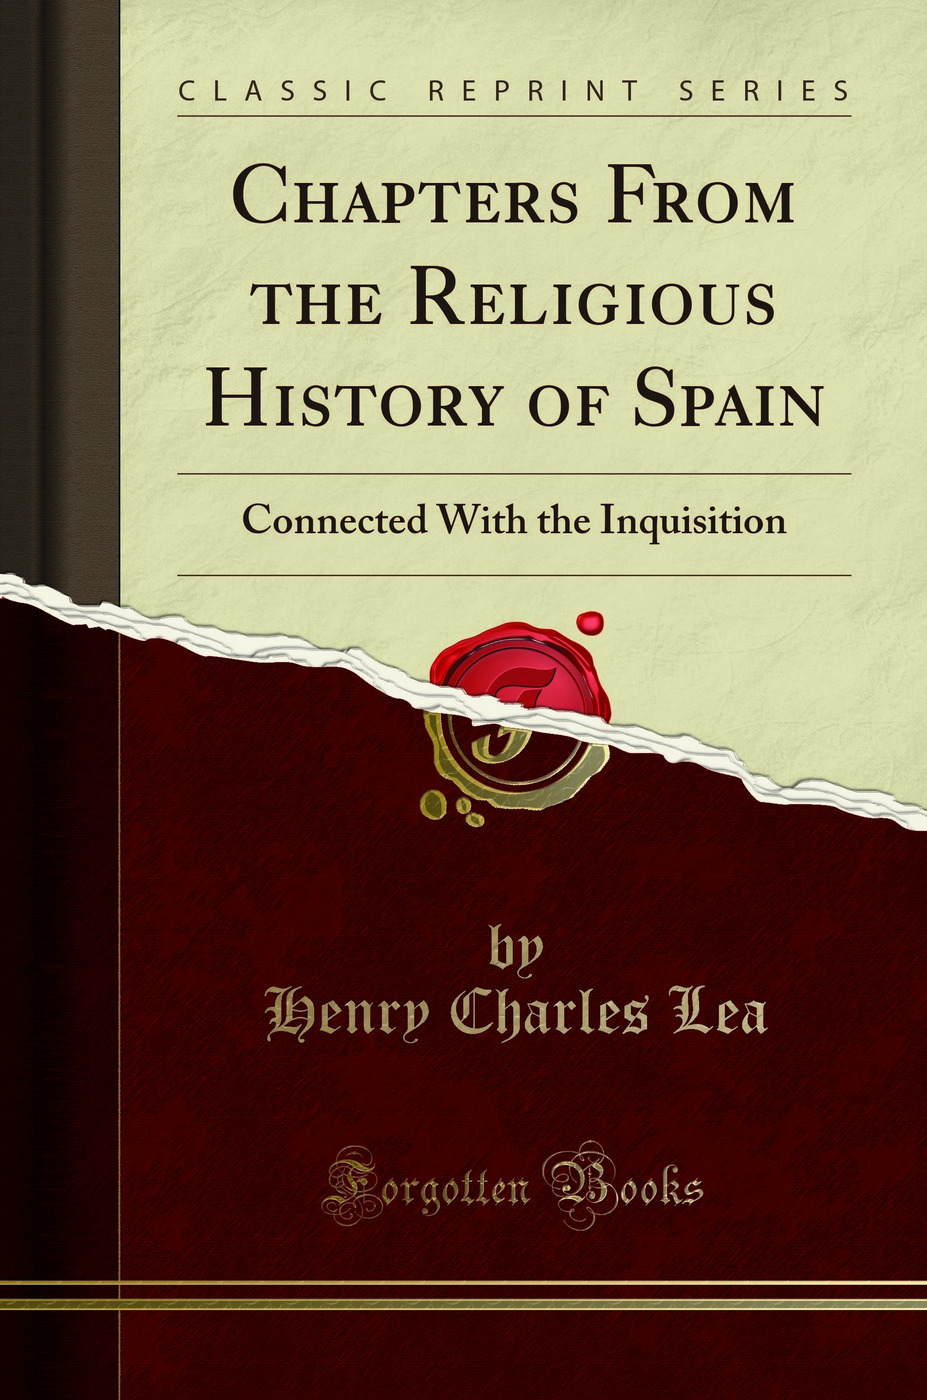 Chapters From the Religious History of Spain: Connected With the Inquisition - Henry Charles Lea